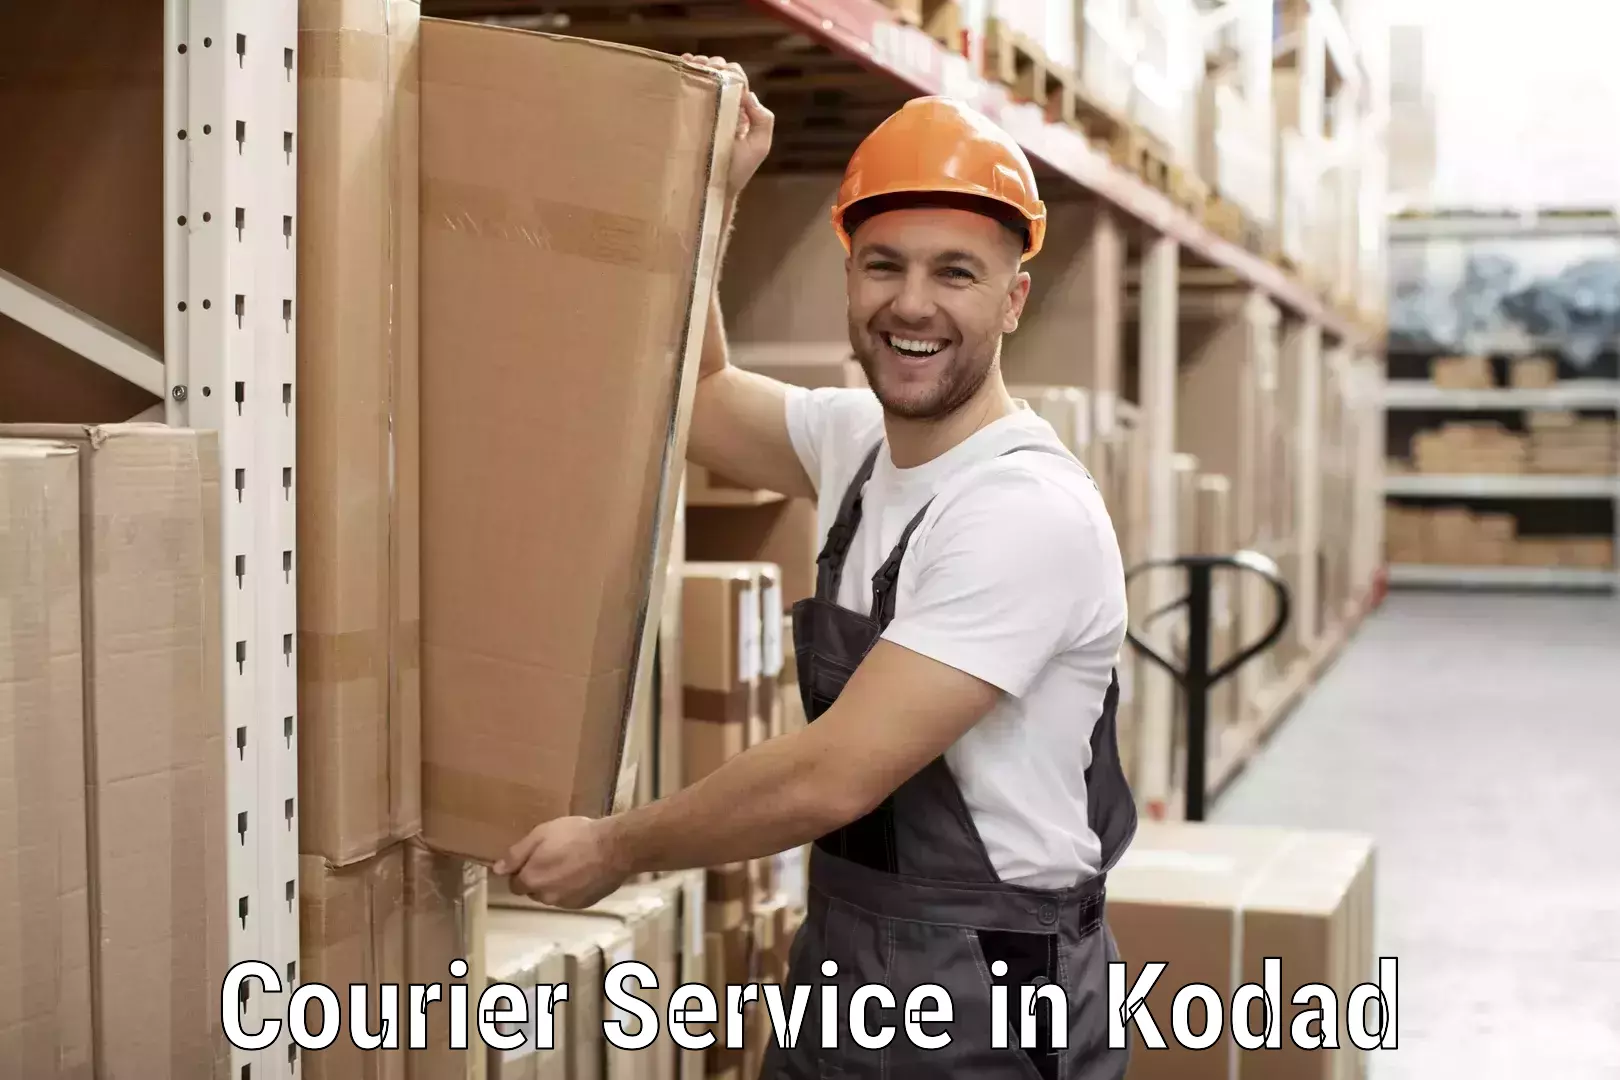 Discount courier rates in Kodad